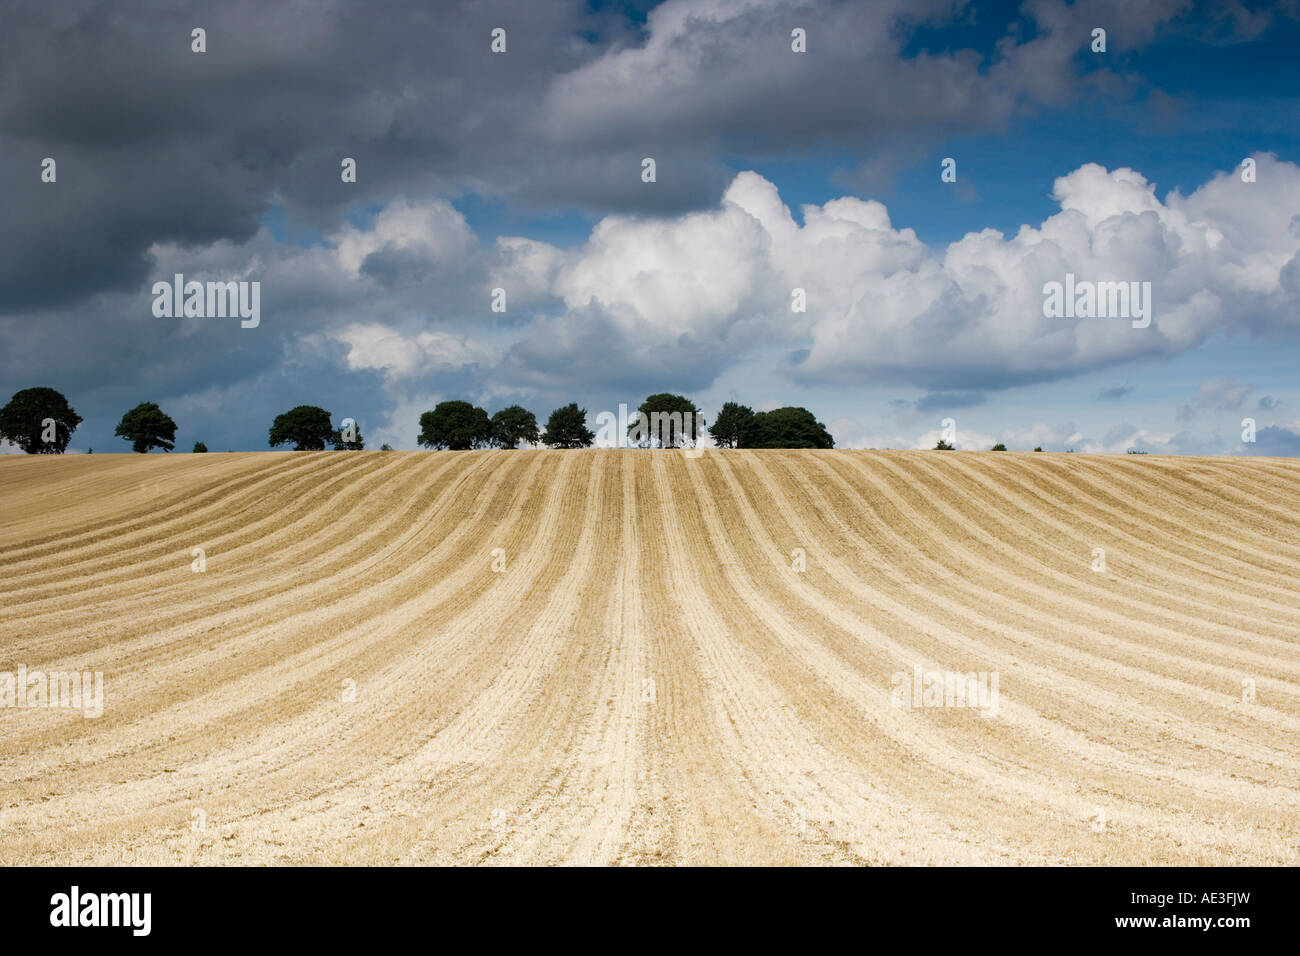 Wheat field in the English countryside after it has been harvested. Broughton, Oxfordshire, England Stock Photo